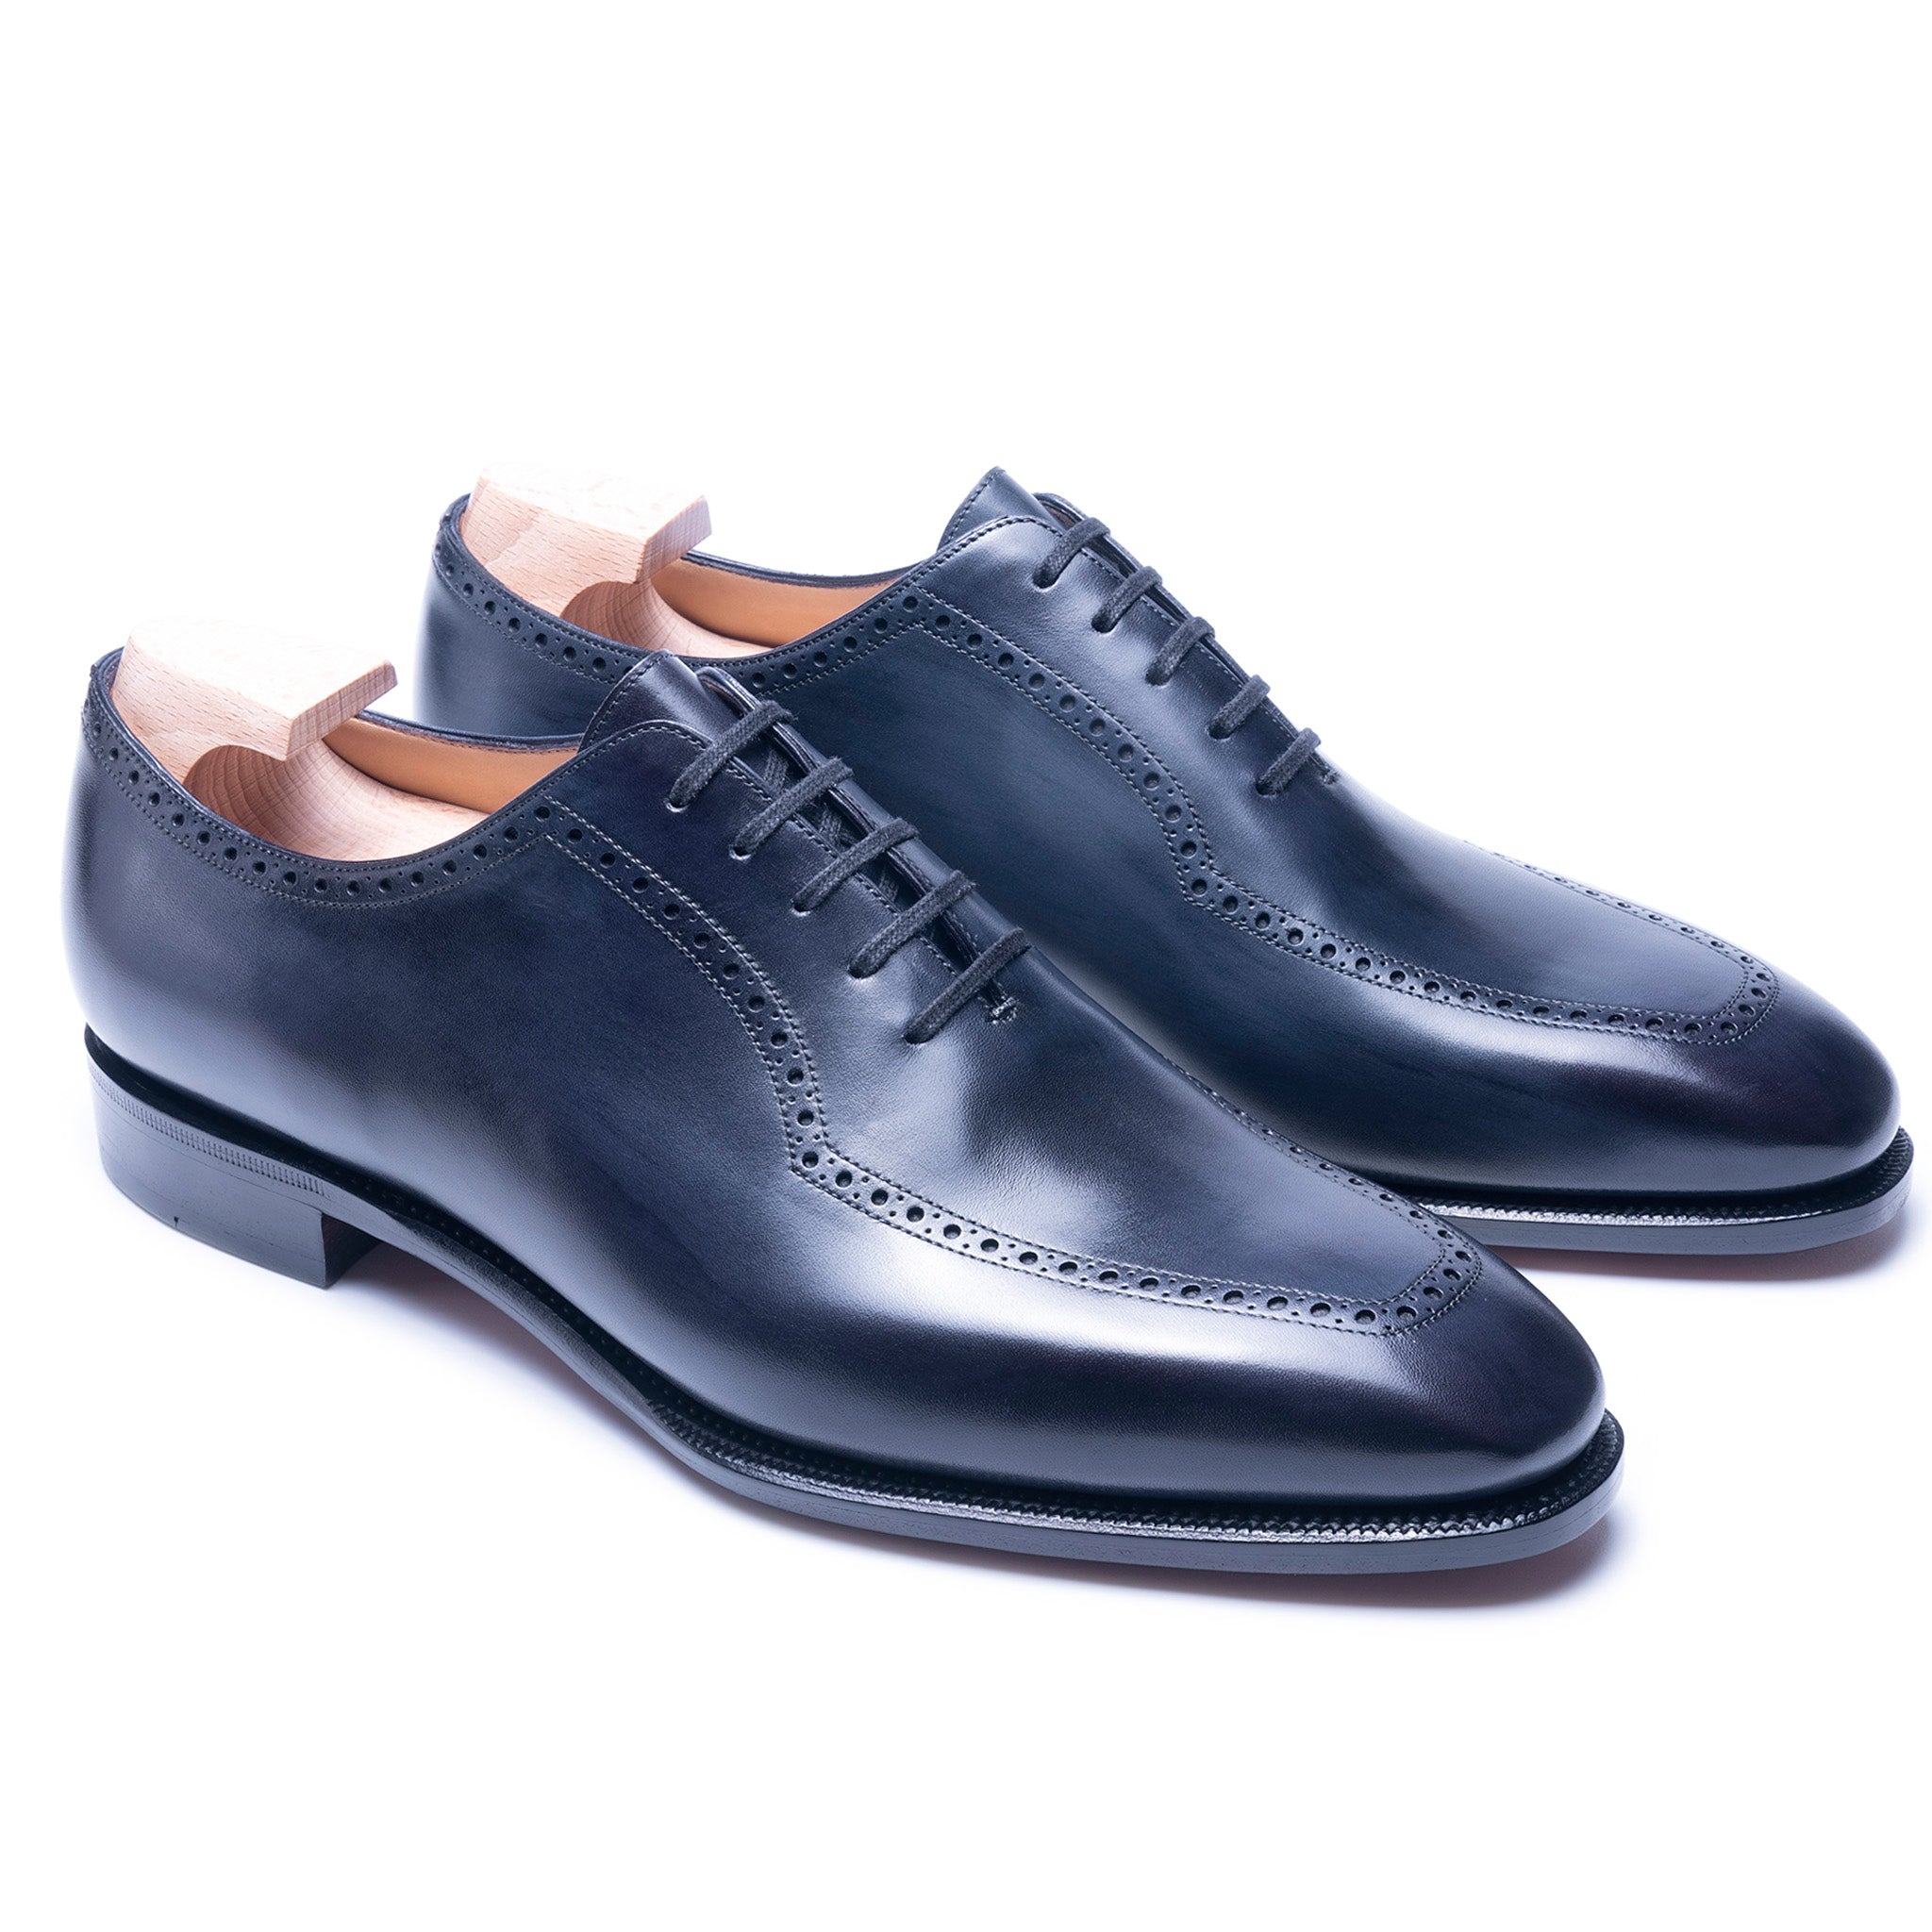 Men's leather shoes | Oxford Shoes Artista Collection - TLB Mallorca